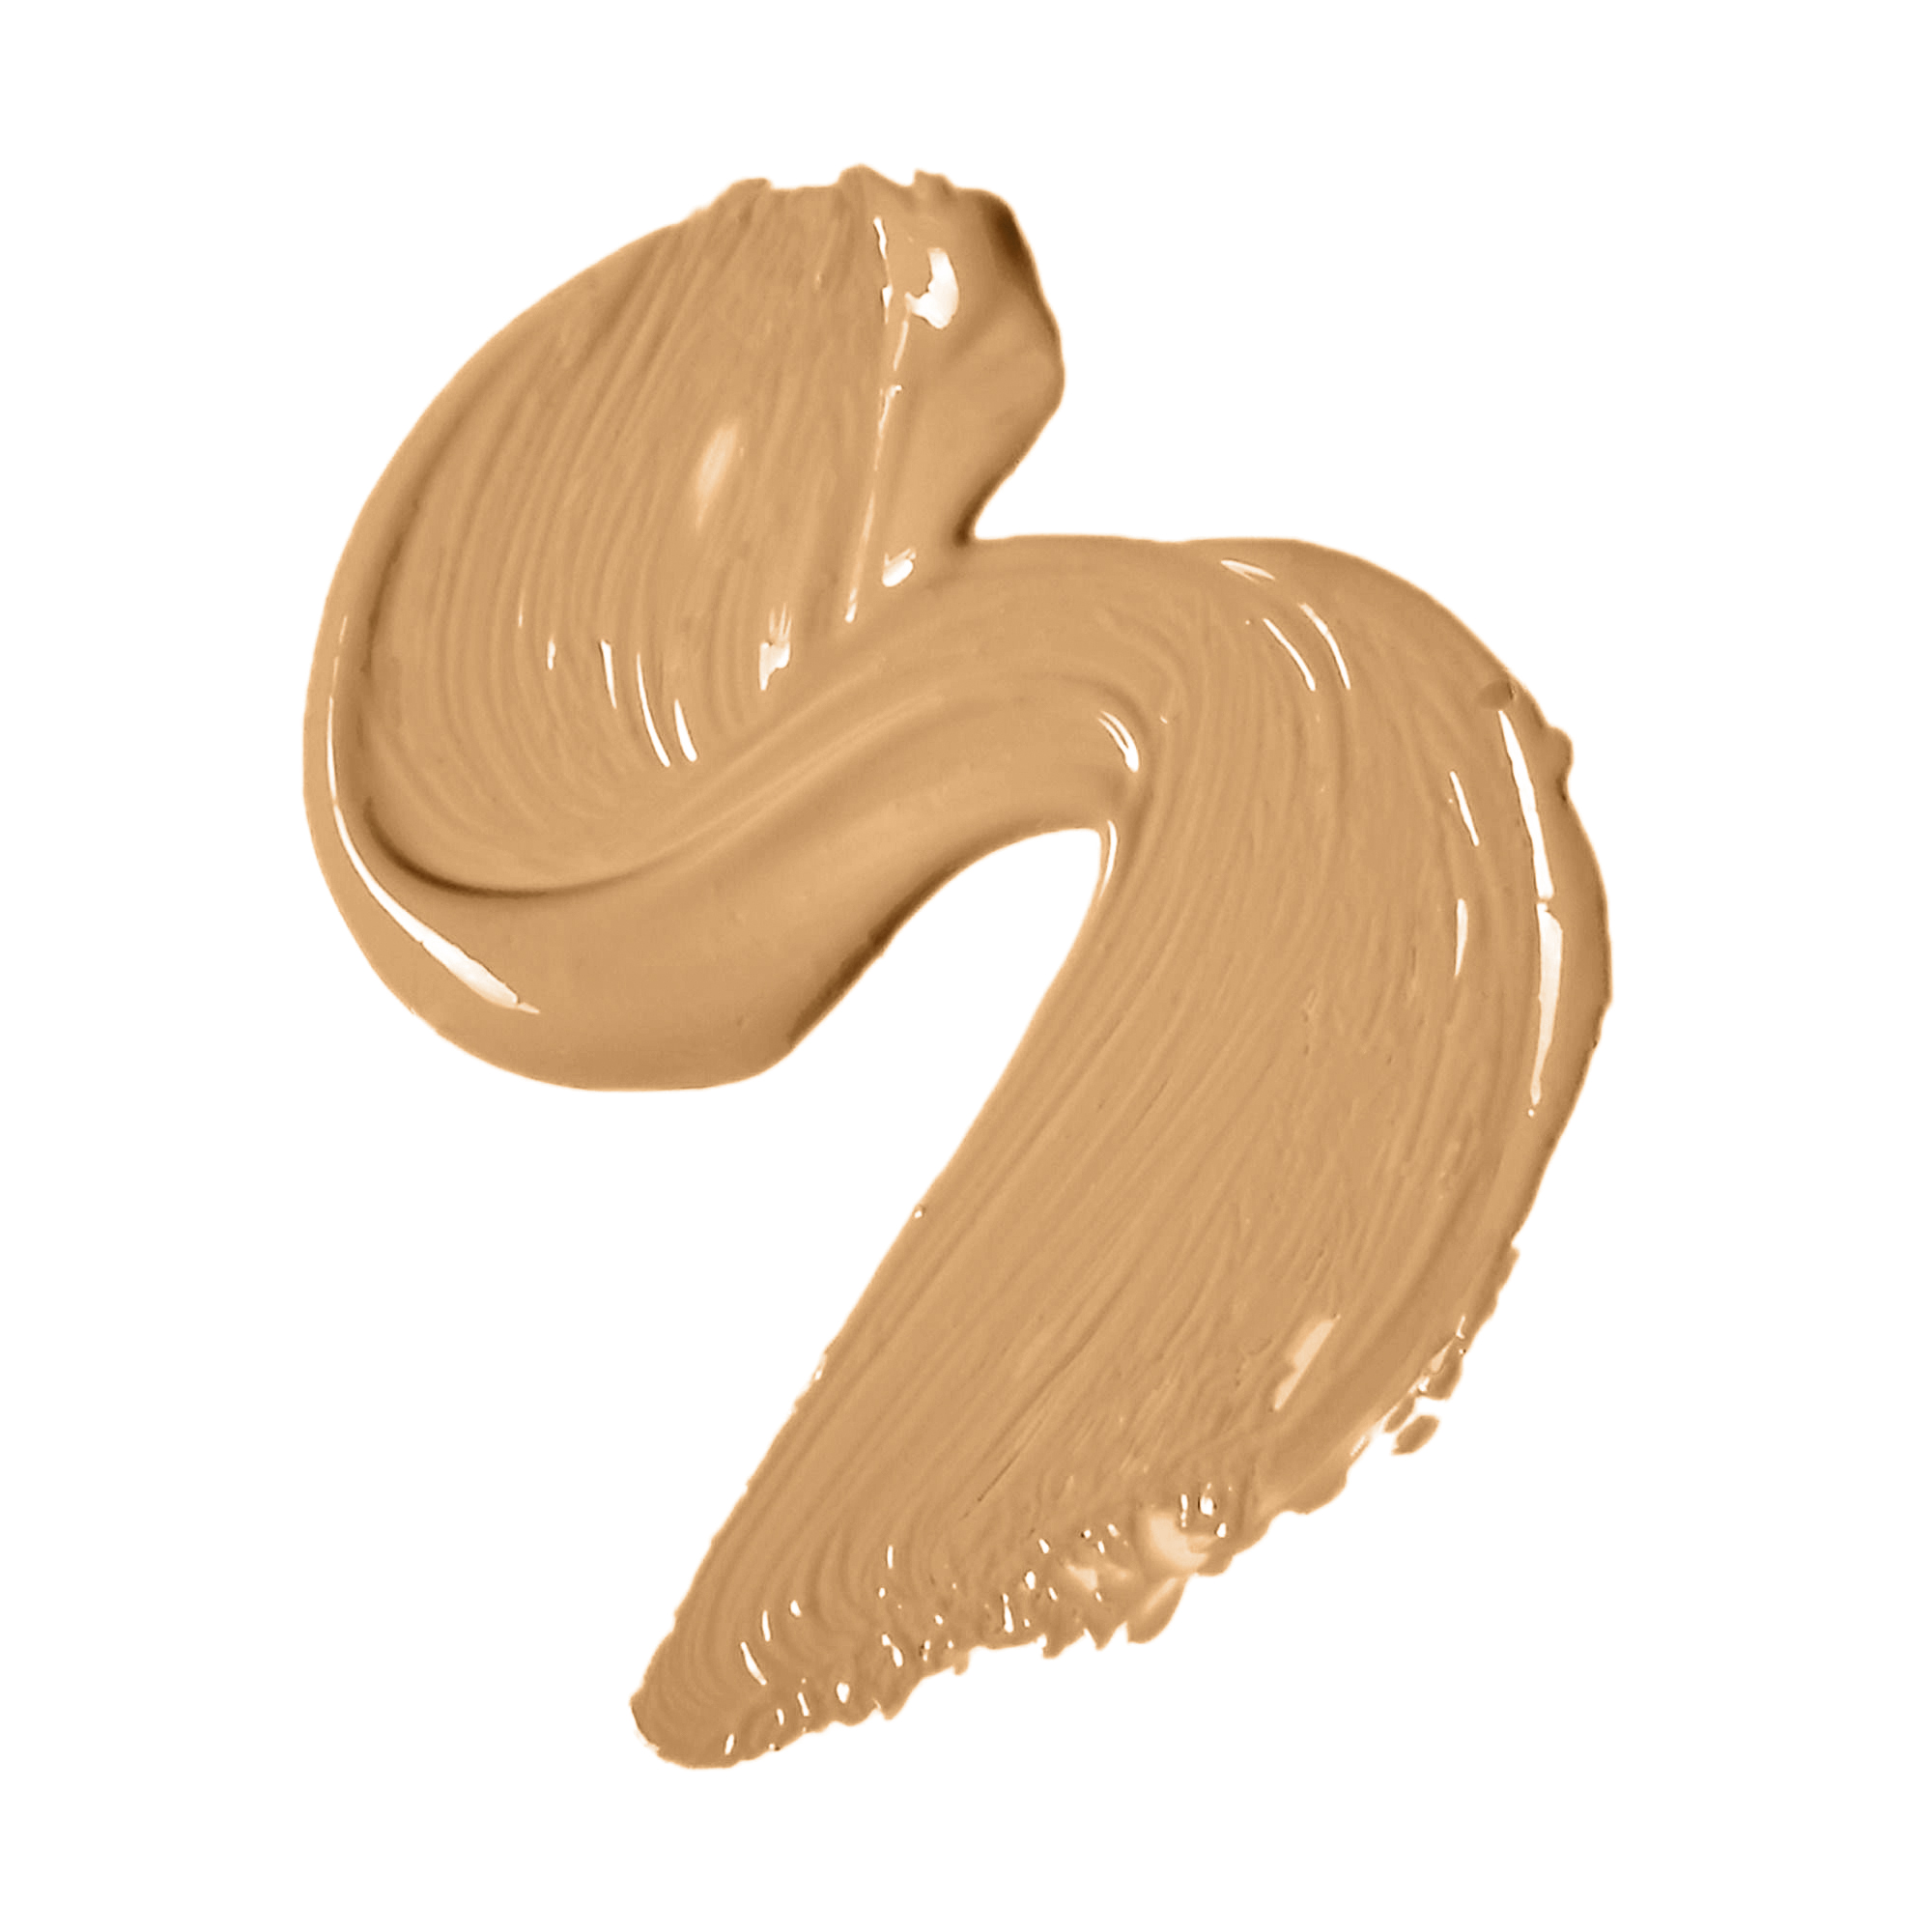 e.l.f. Hydrating Camo Concealer, Tan Sand - image 4 of 7